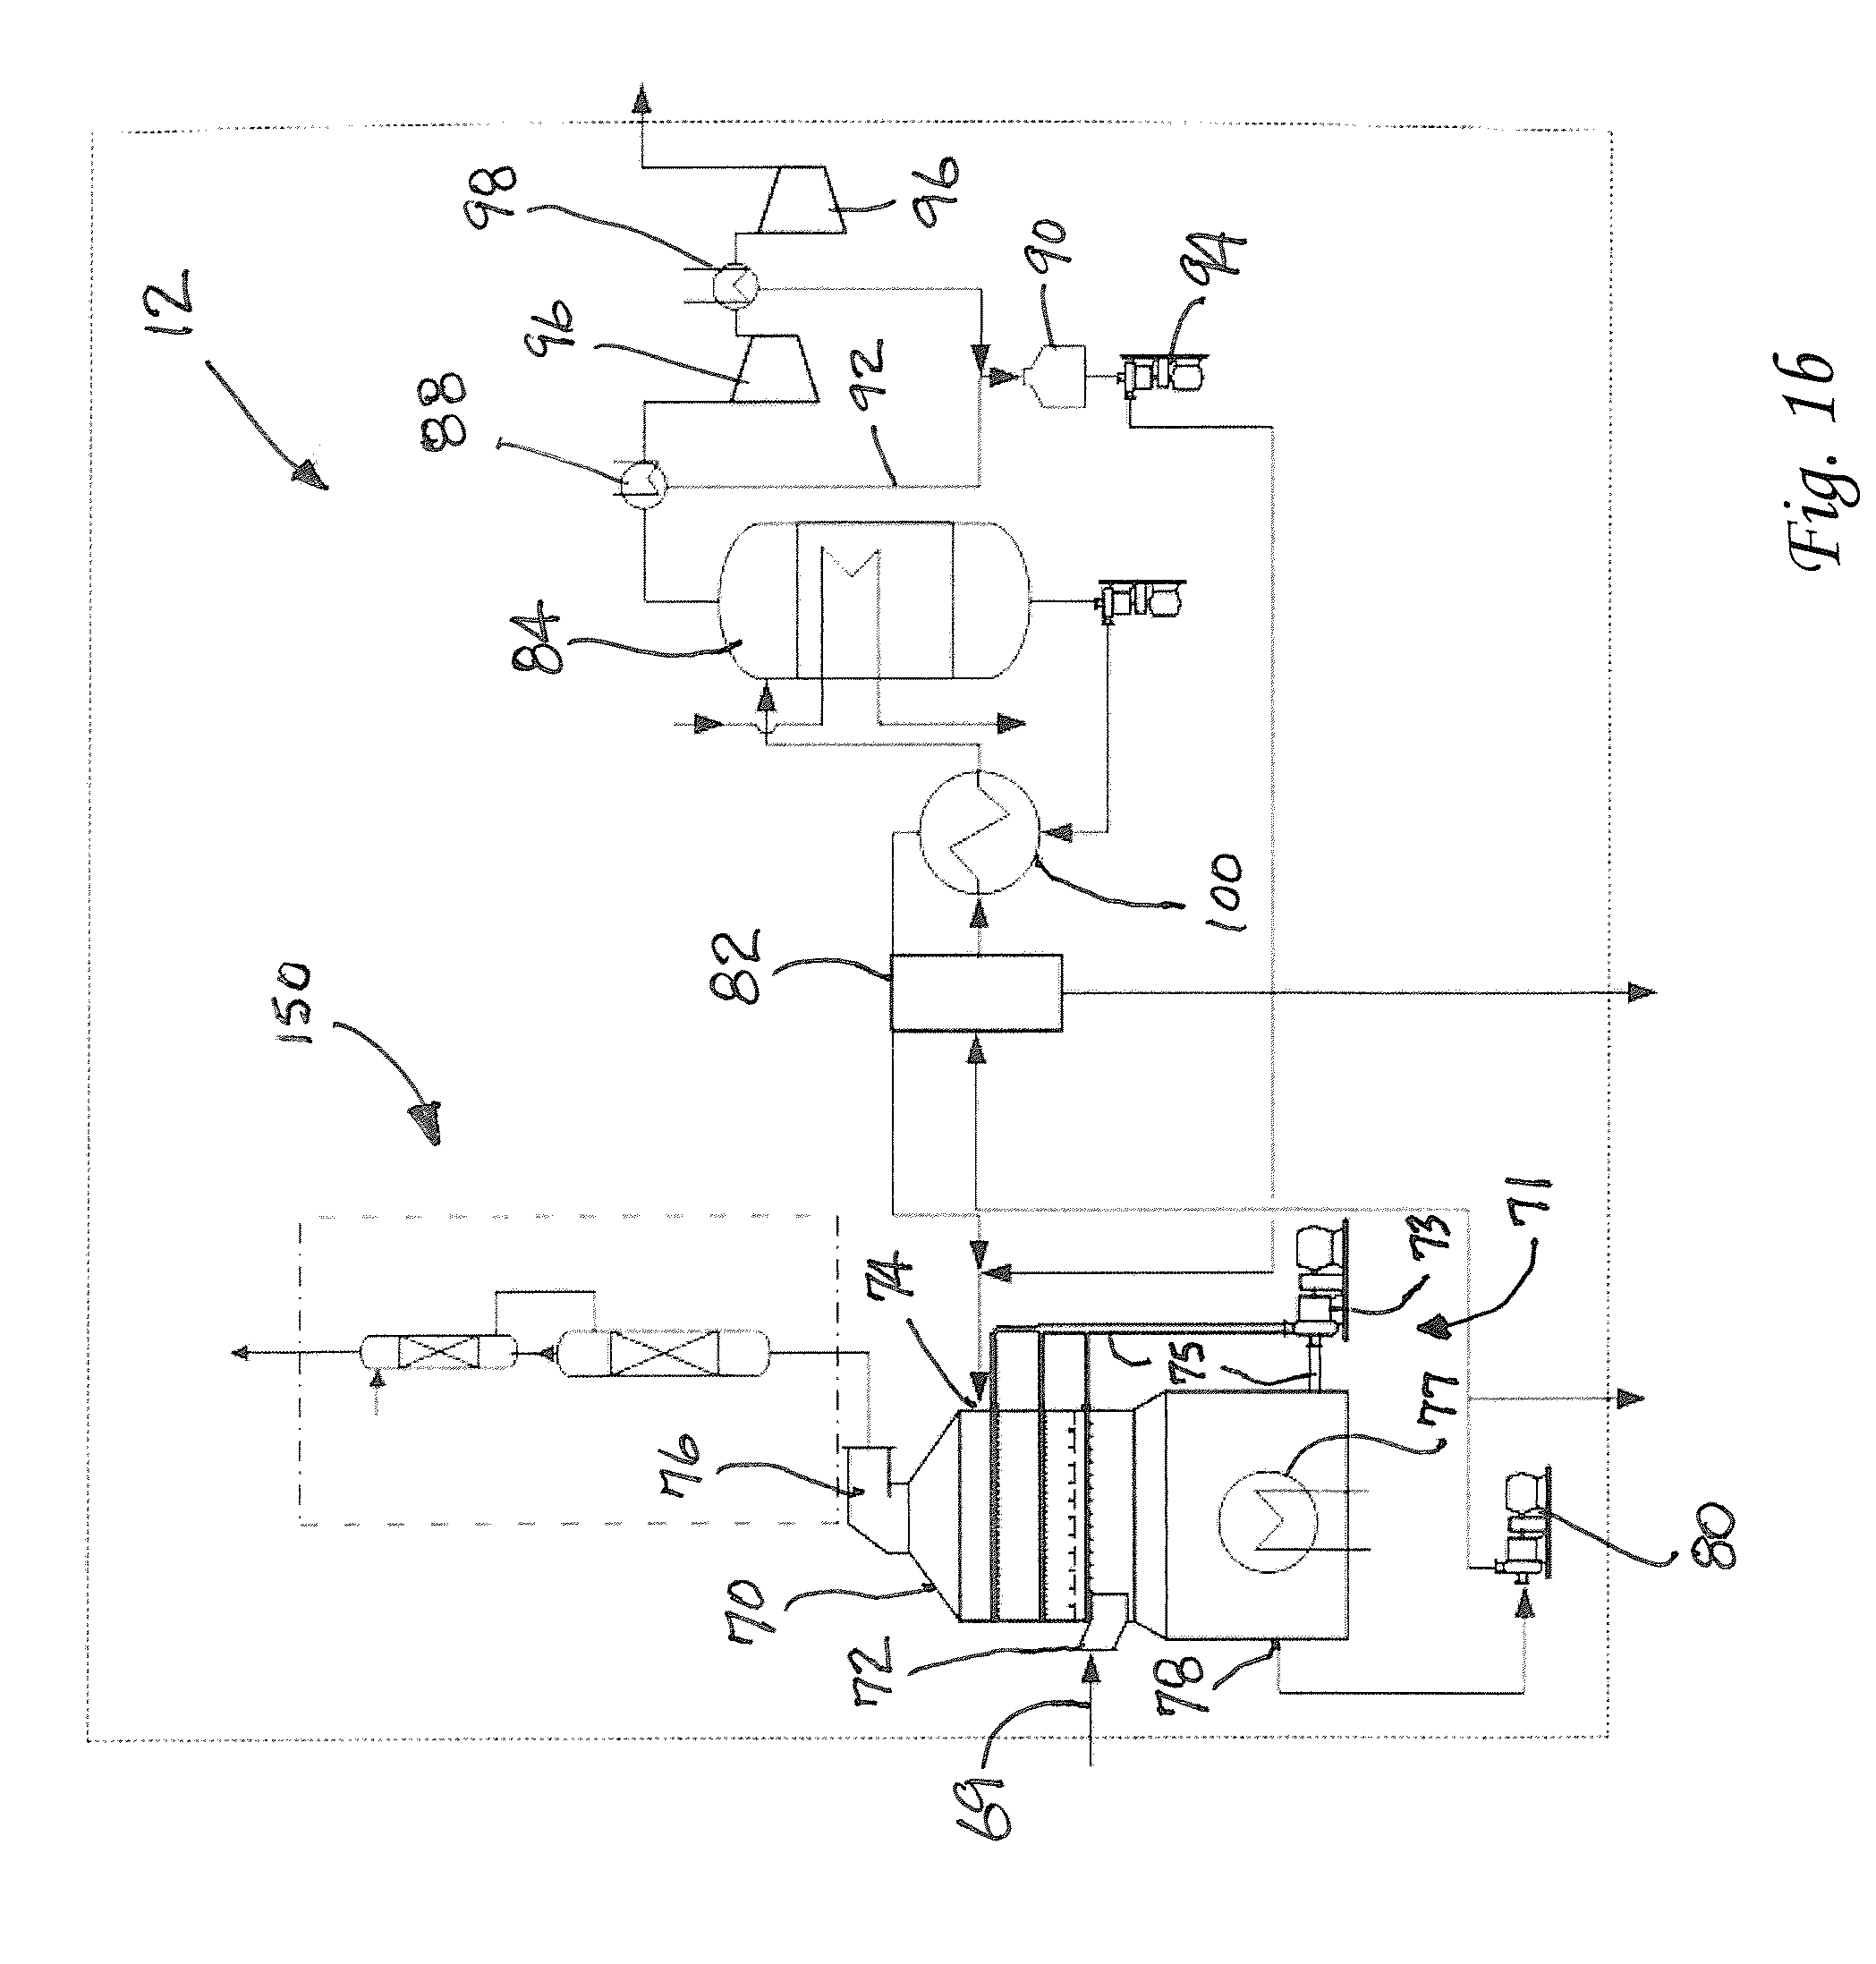 Method for Removing CO2 from Coal-Fired Power Plant Flue Gas Using Ammonia as the Scrubbing Solution, with a Chemical Additive for Reducing NH3 Losses, Coupled with a Membrane for Concentrating the CO2 Stream to the Gas Stripper